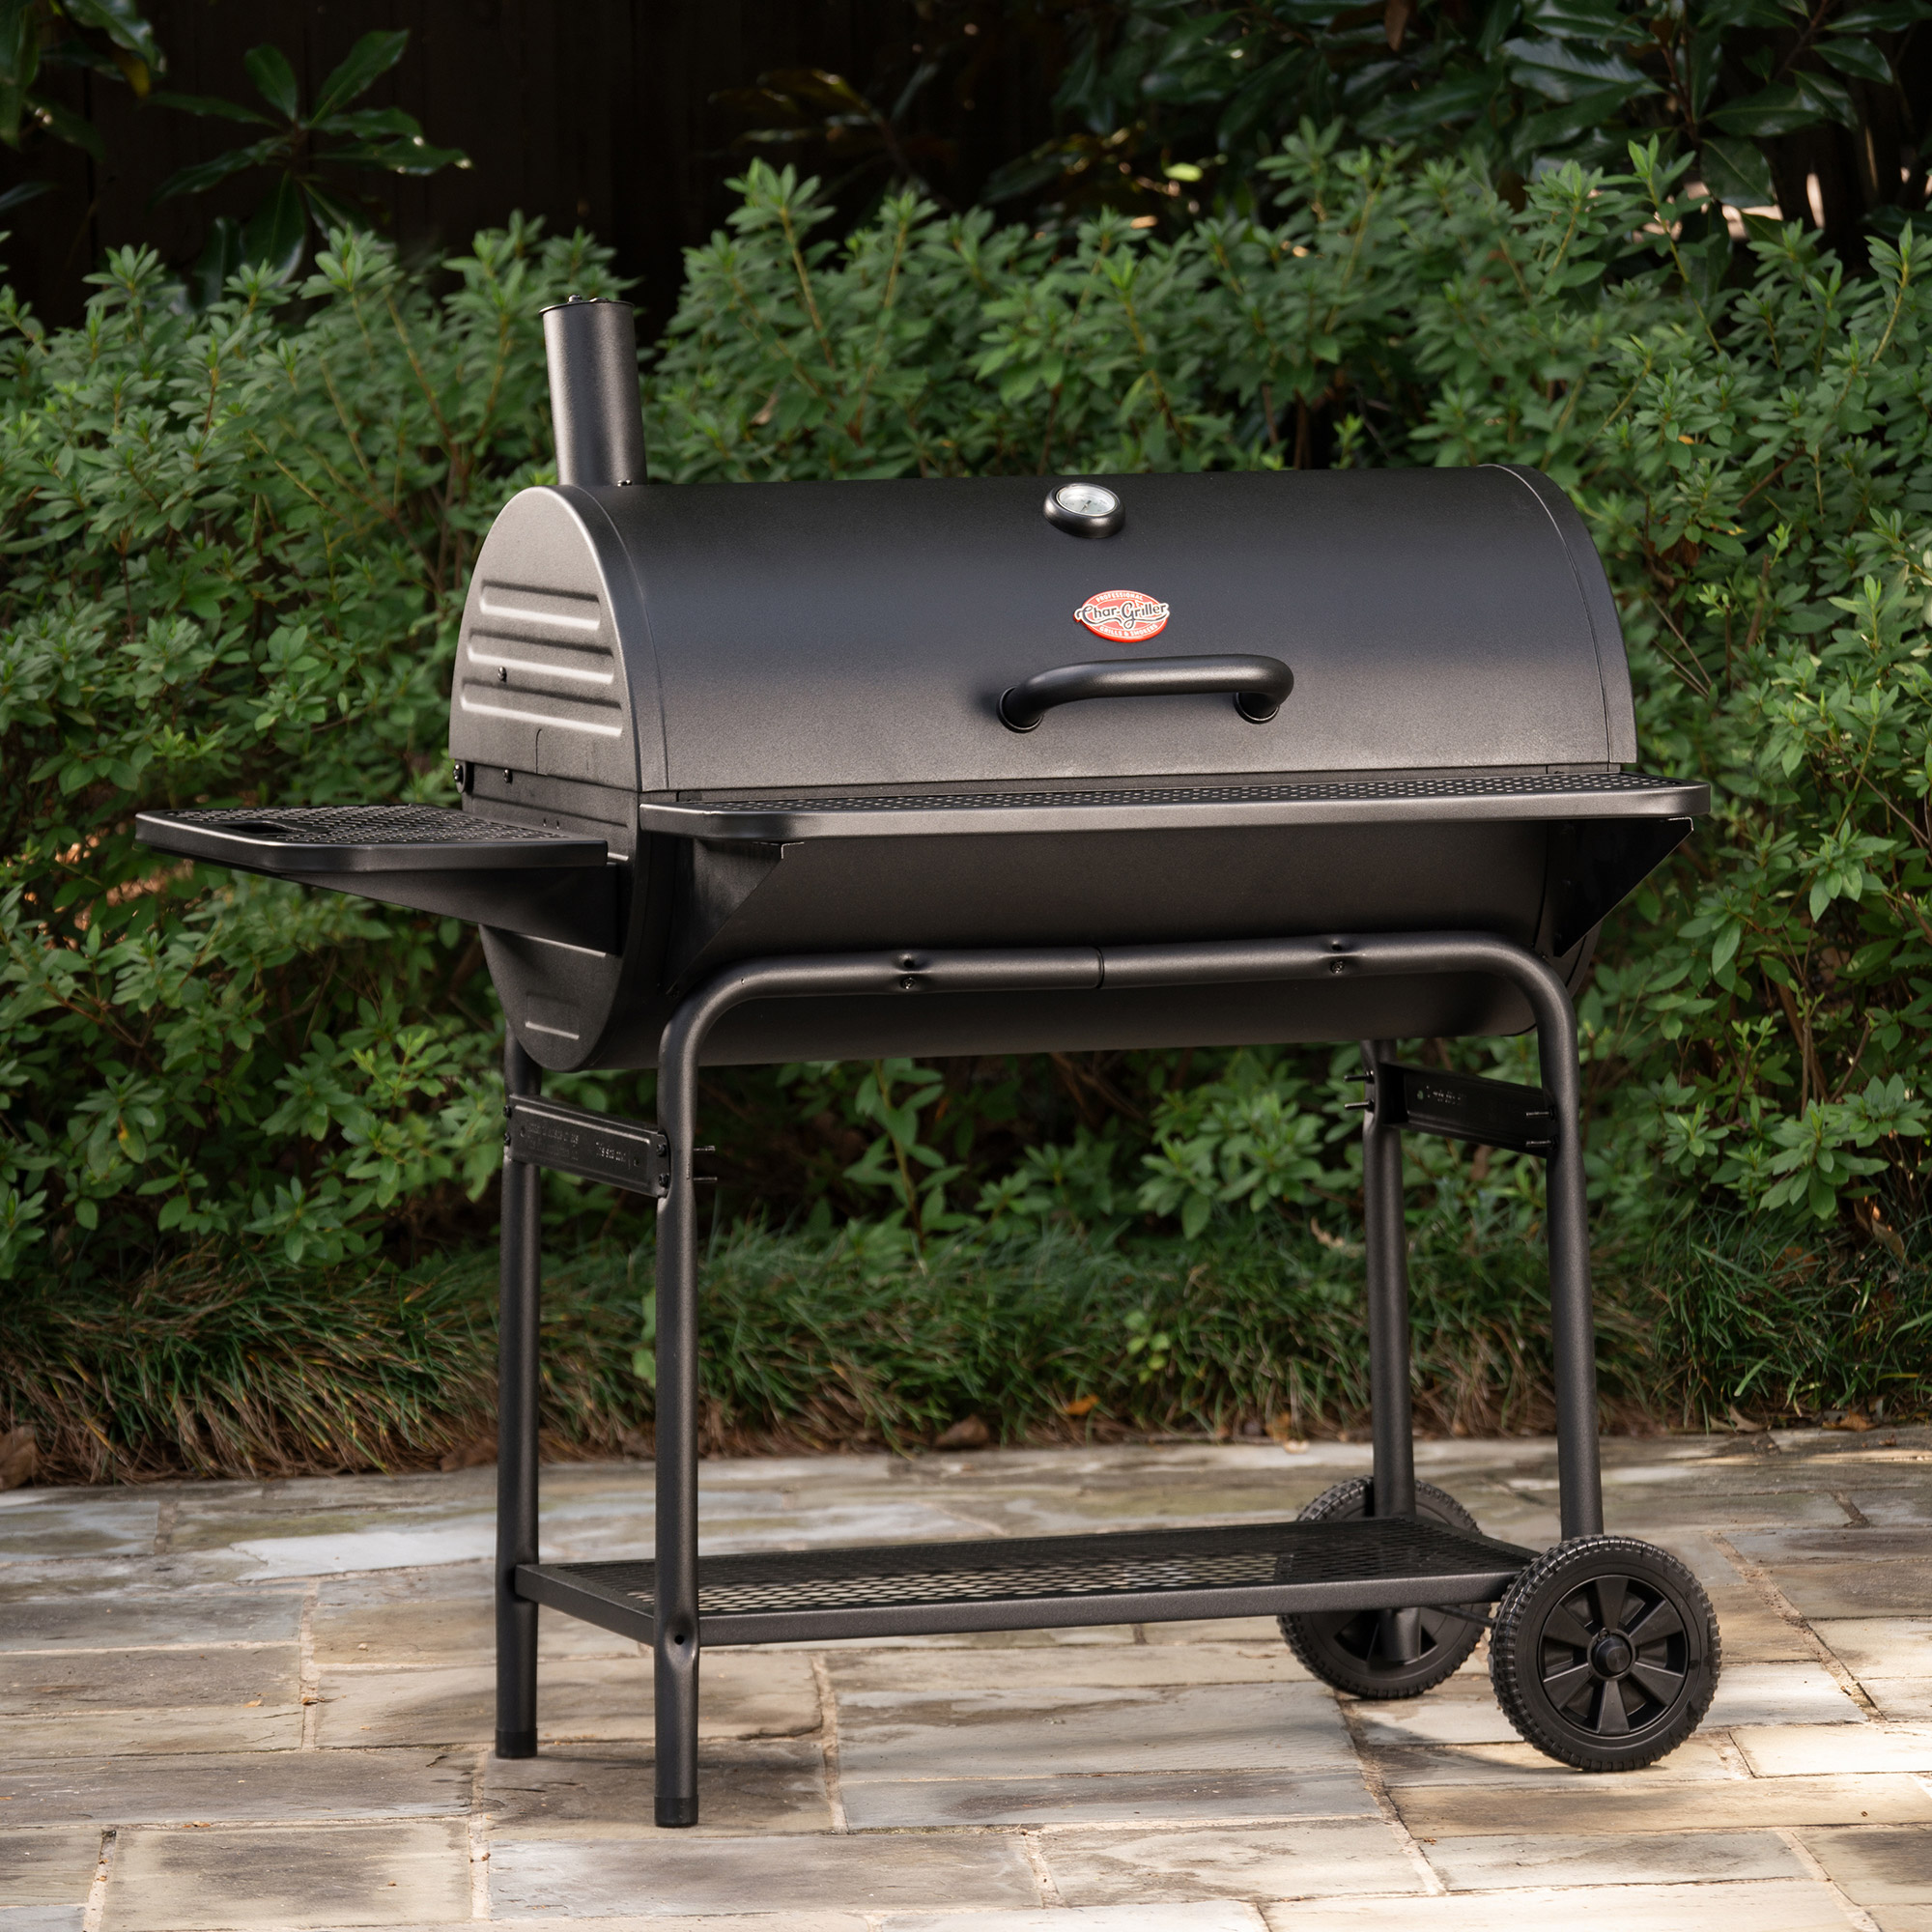 Char-Griller Pro Deluxe XL Charcoal Barrel Grill - image 2 of 8